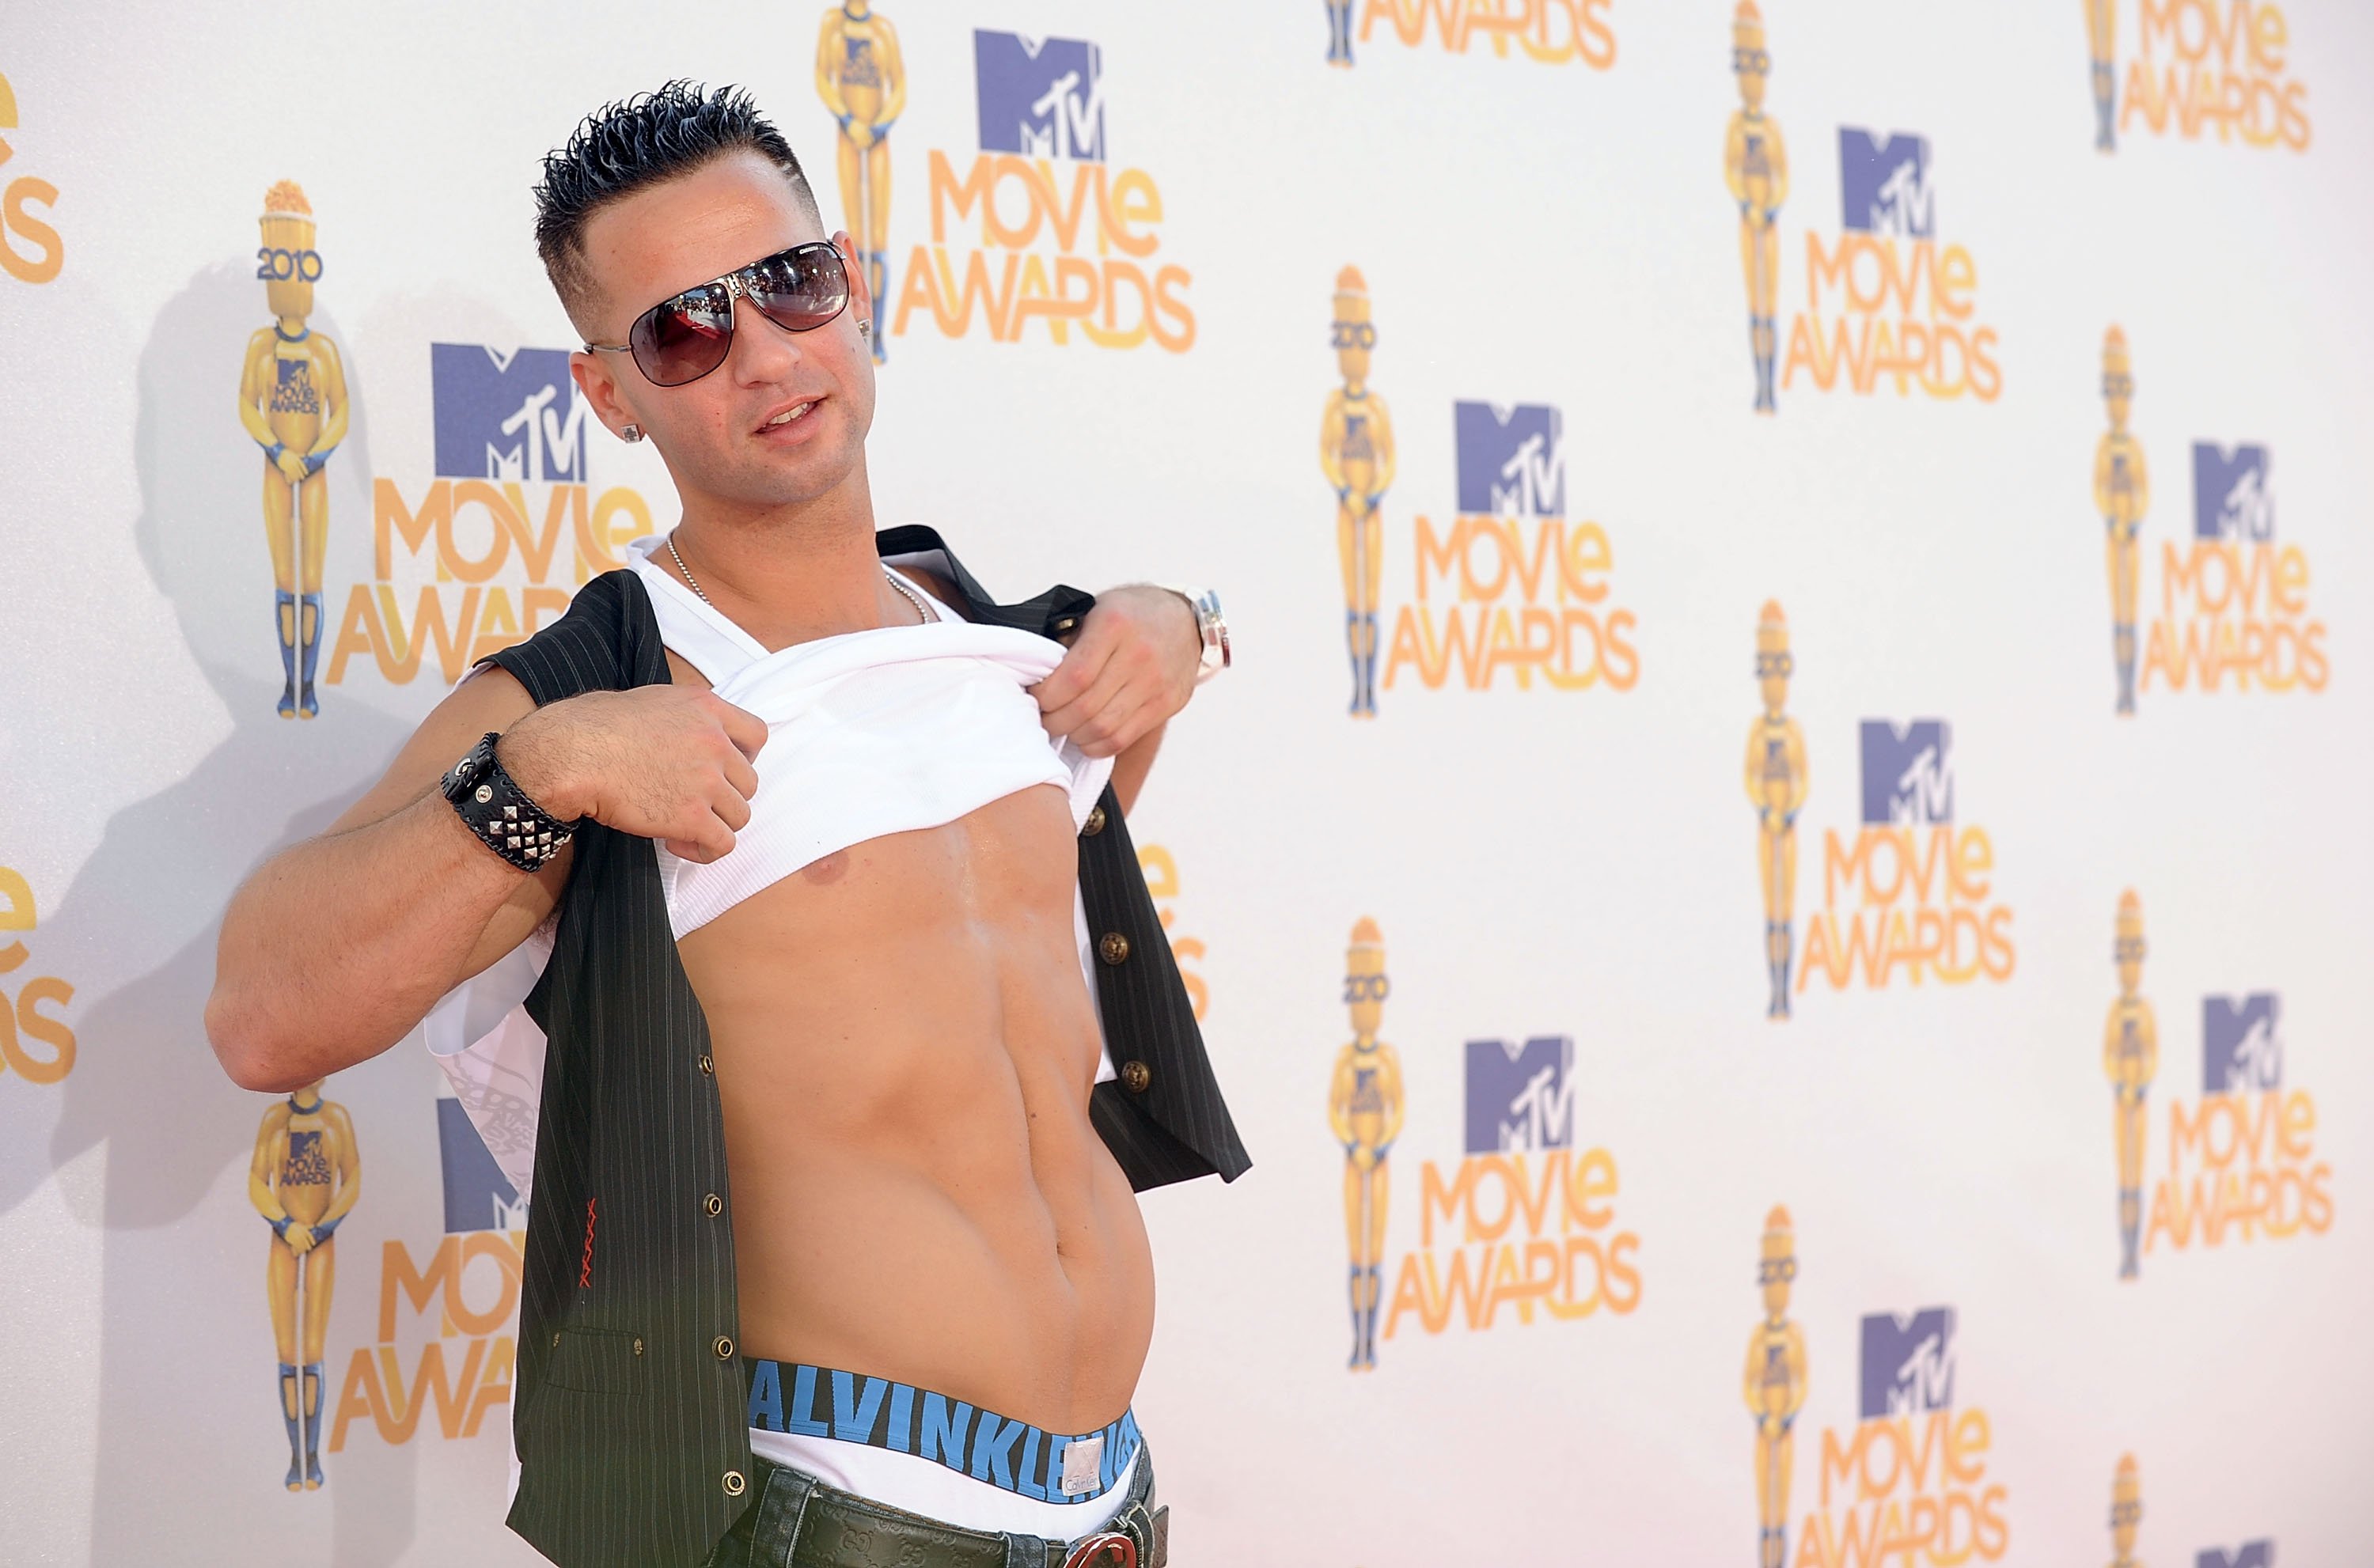 Mike 'The Situation' Sorrentino lifts his shirt to expose his abs, which got the MTV star his nickname